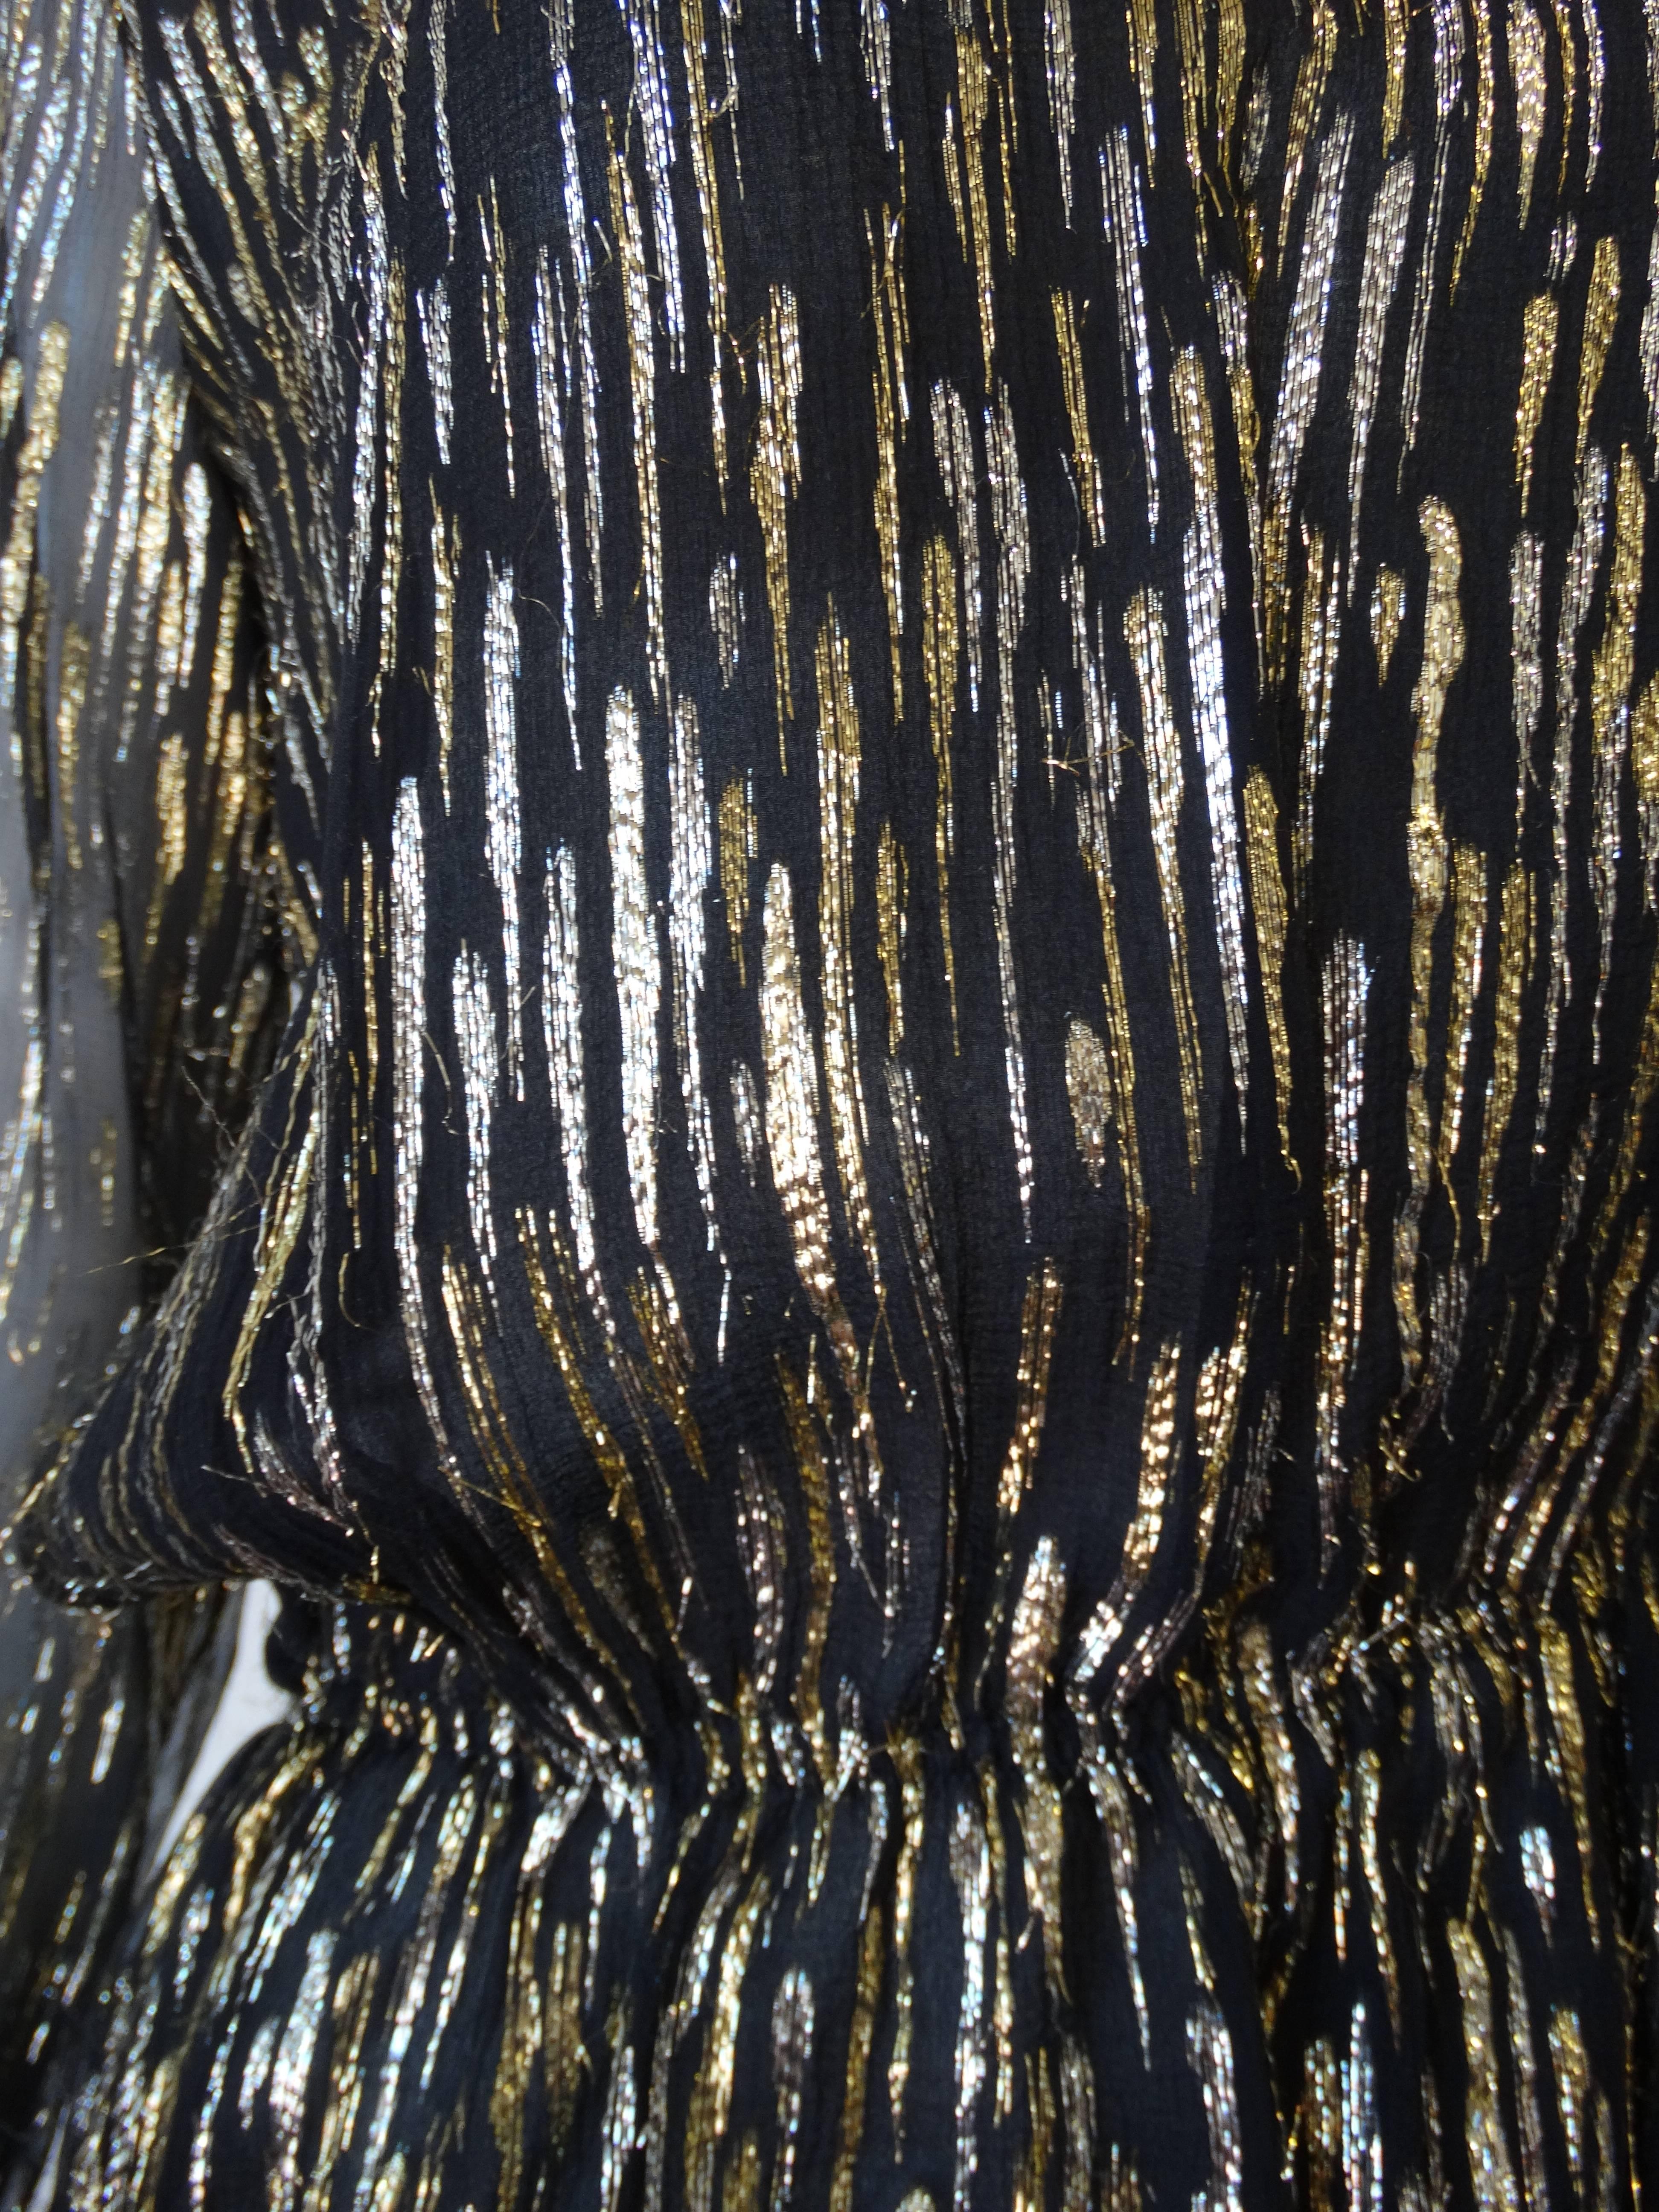 Step out with shine in our incredible 1980s blouse from Chanel's ready to wear line- Chanel Creations. Made of a sheer black fabric interwoven with strips of gold and silver metallic threads. Peplum like fit with elasticized cinched waistline.